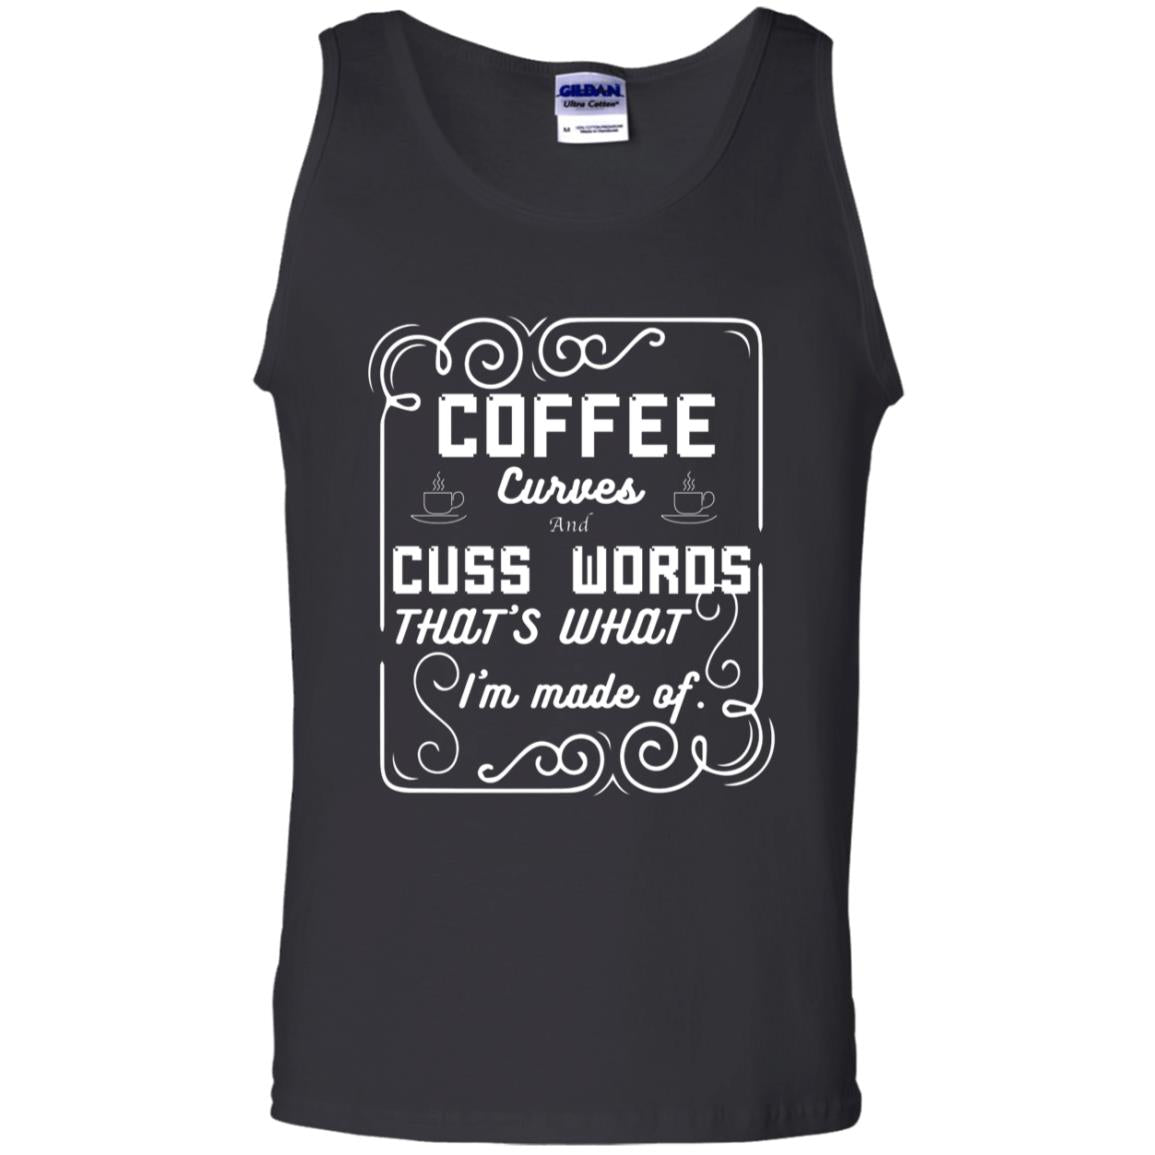 Coffee Curves And Cuss Words That's What I'm Made Of ShirtG220 Gildan 100% Cotton Tank Top